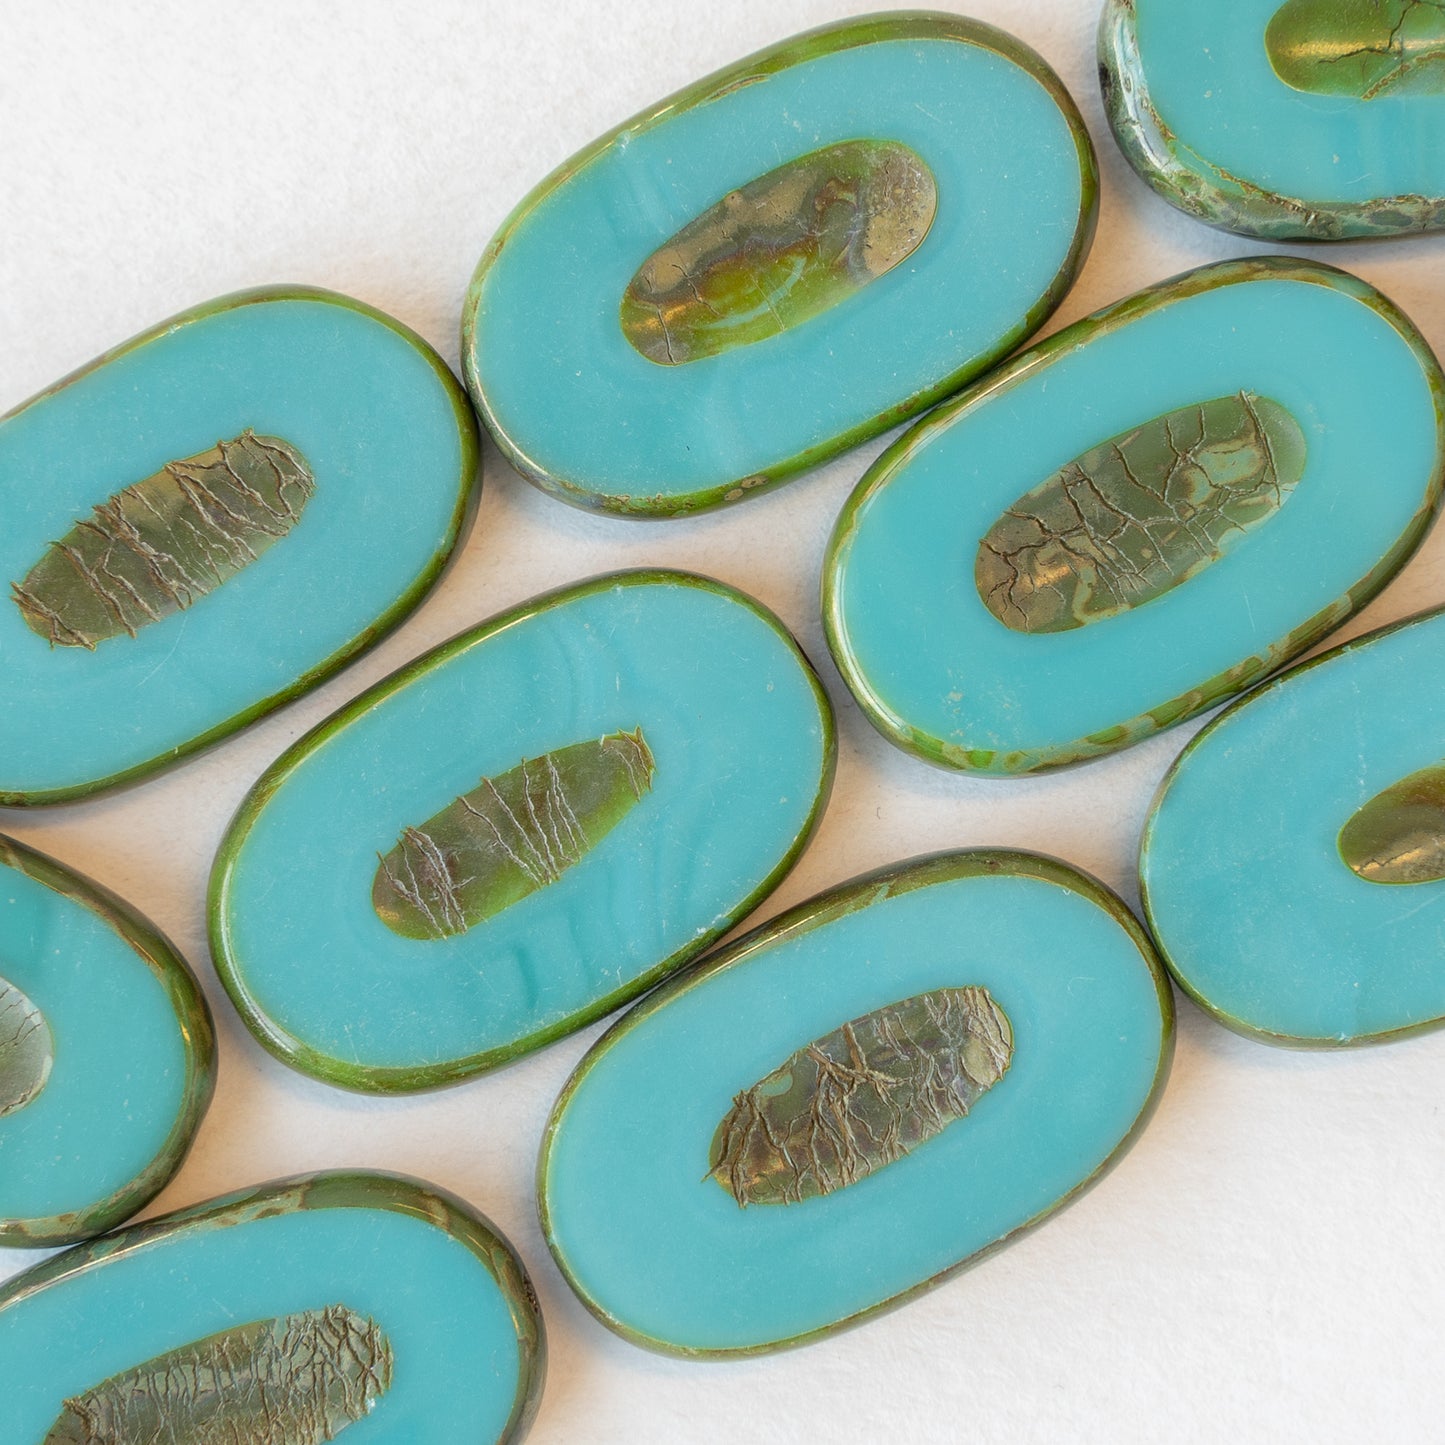 26x15mm Large Oval Picasso Beads - Turquoise Picasso - 2 or 10 beads